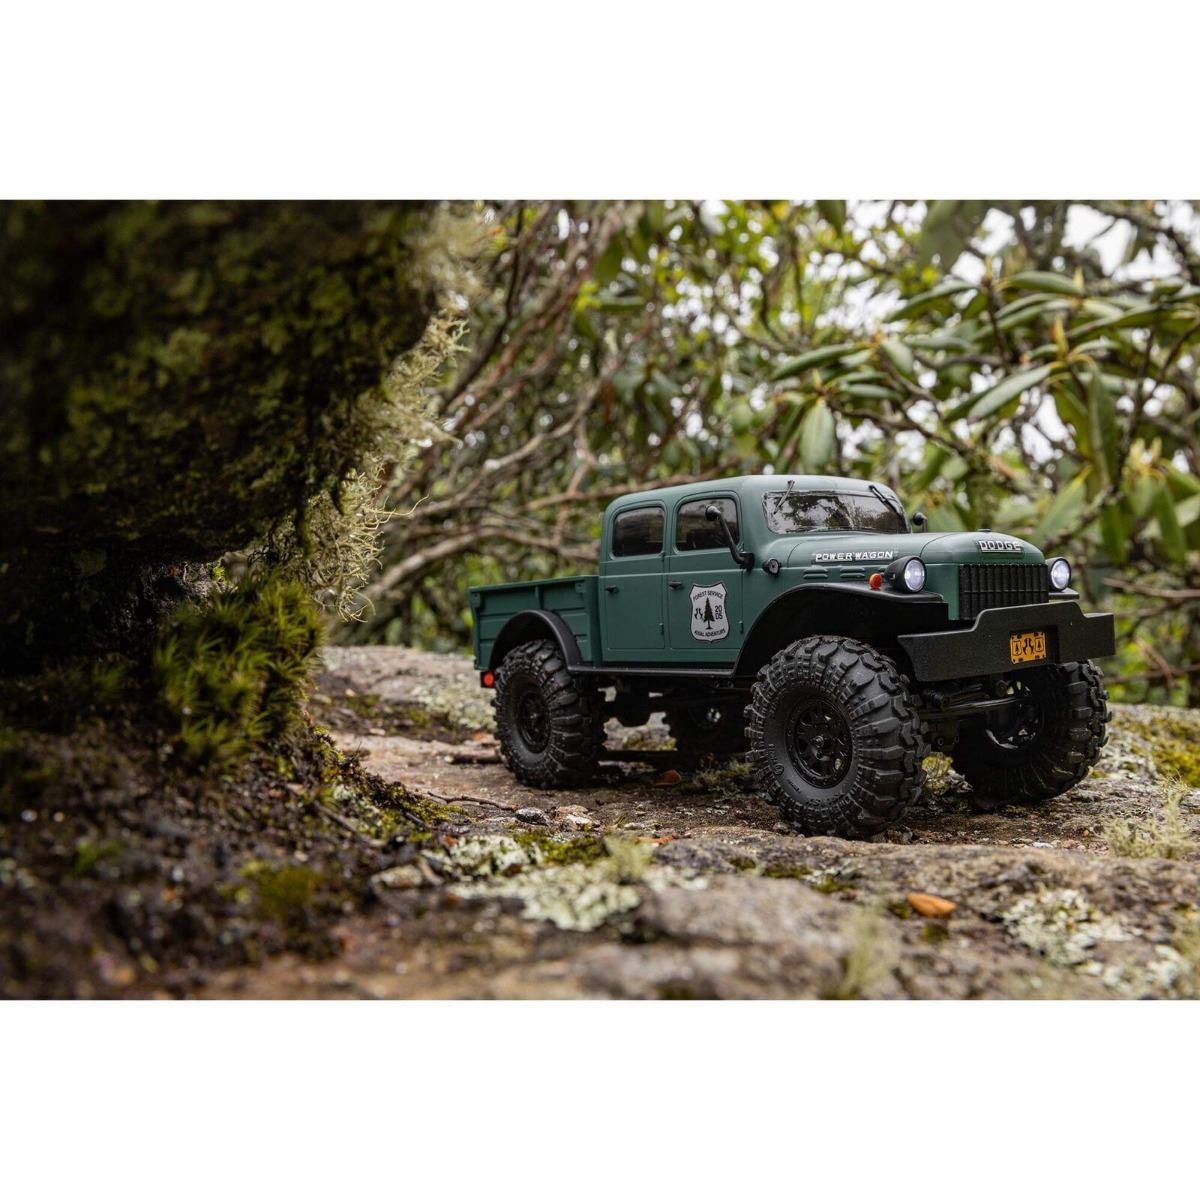 Axial 1/24 SCX24 Dodge Power Wagon 4WD Rock Crawler Brushed RTR, G